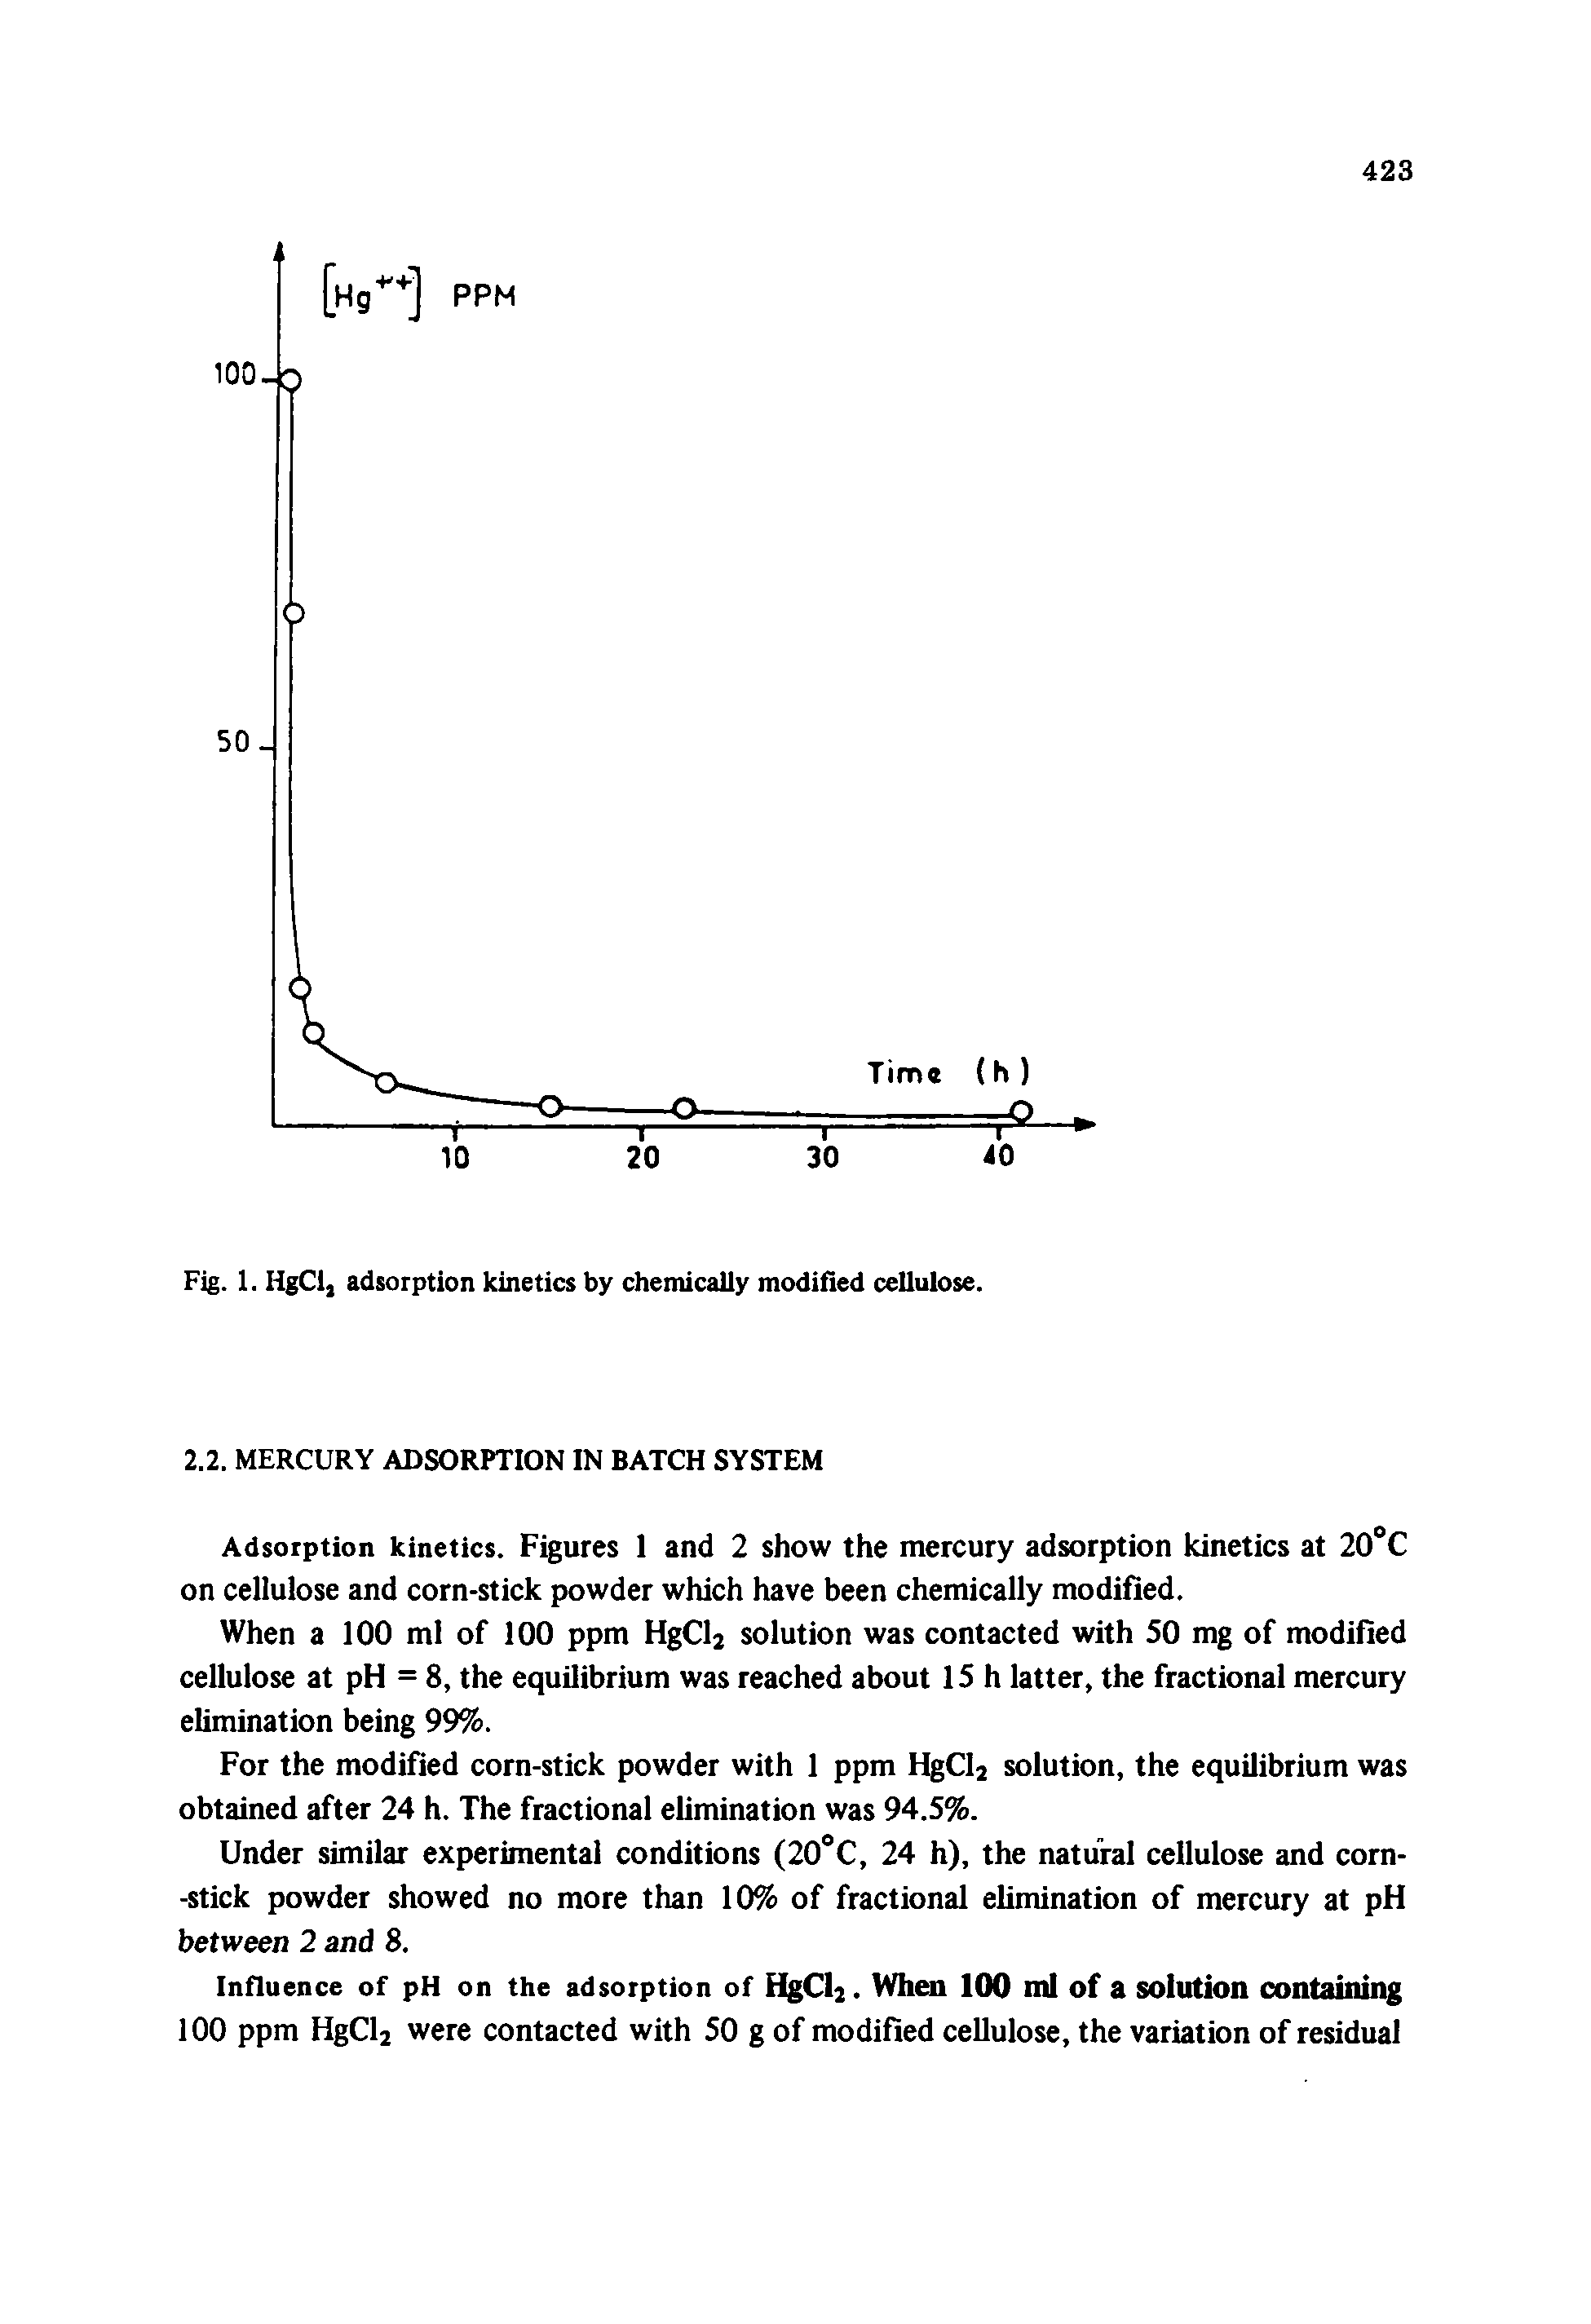 Fig. 1. HgCl, adsorption kinetics by chemically modified cellulose.